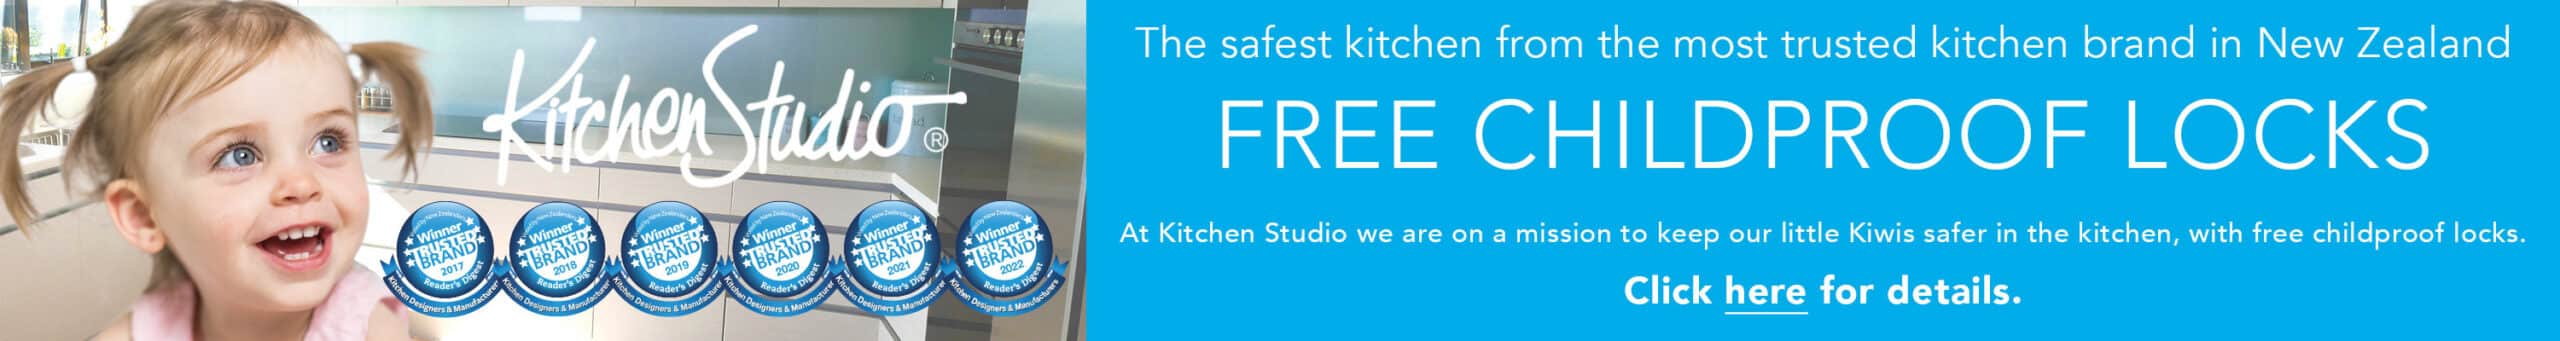 The safest kitchen from the most trusted kitchen brand